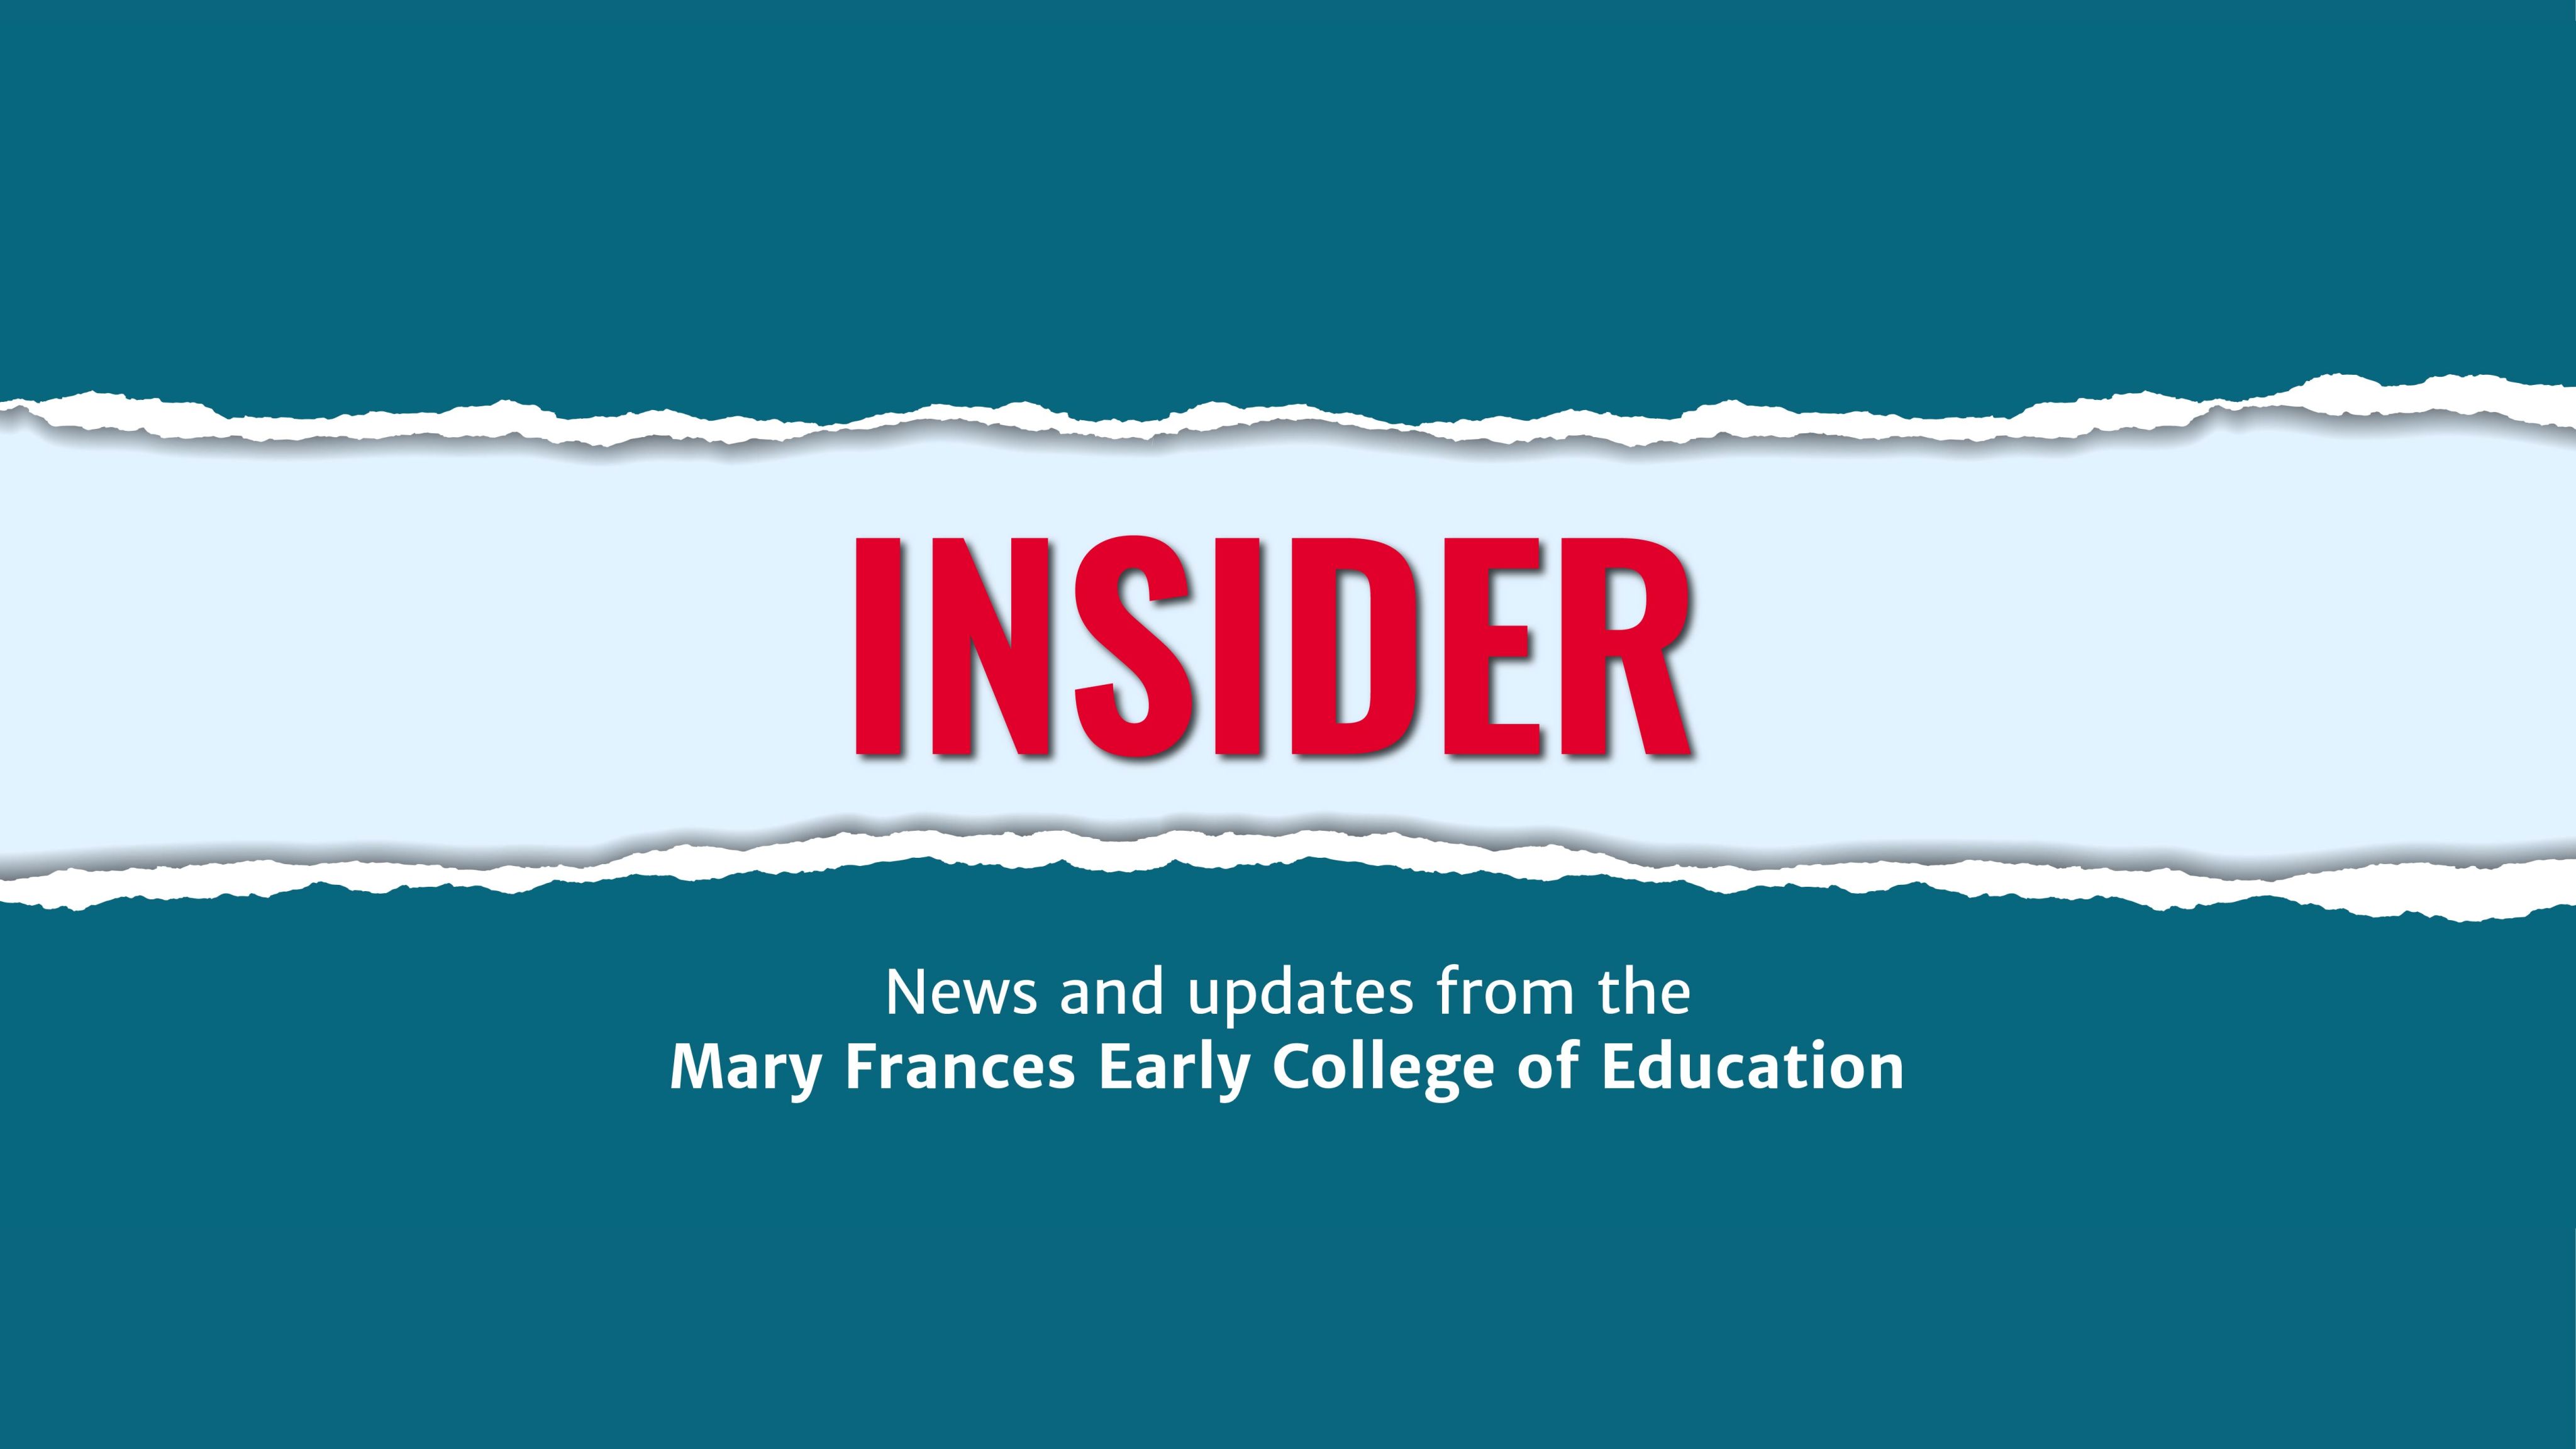 Insider: News and Updates from the Mary Frances Early College of Education